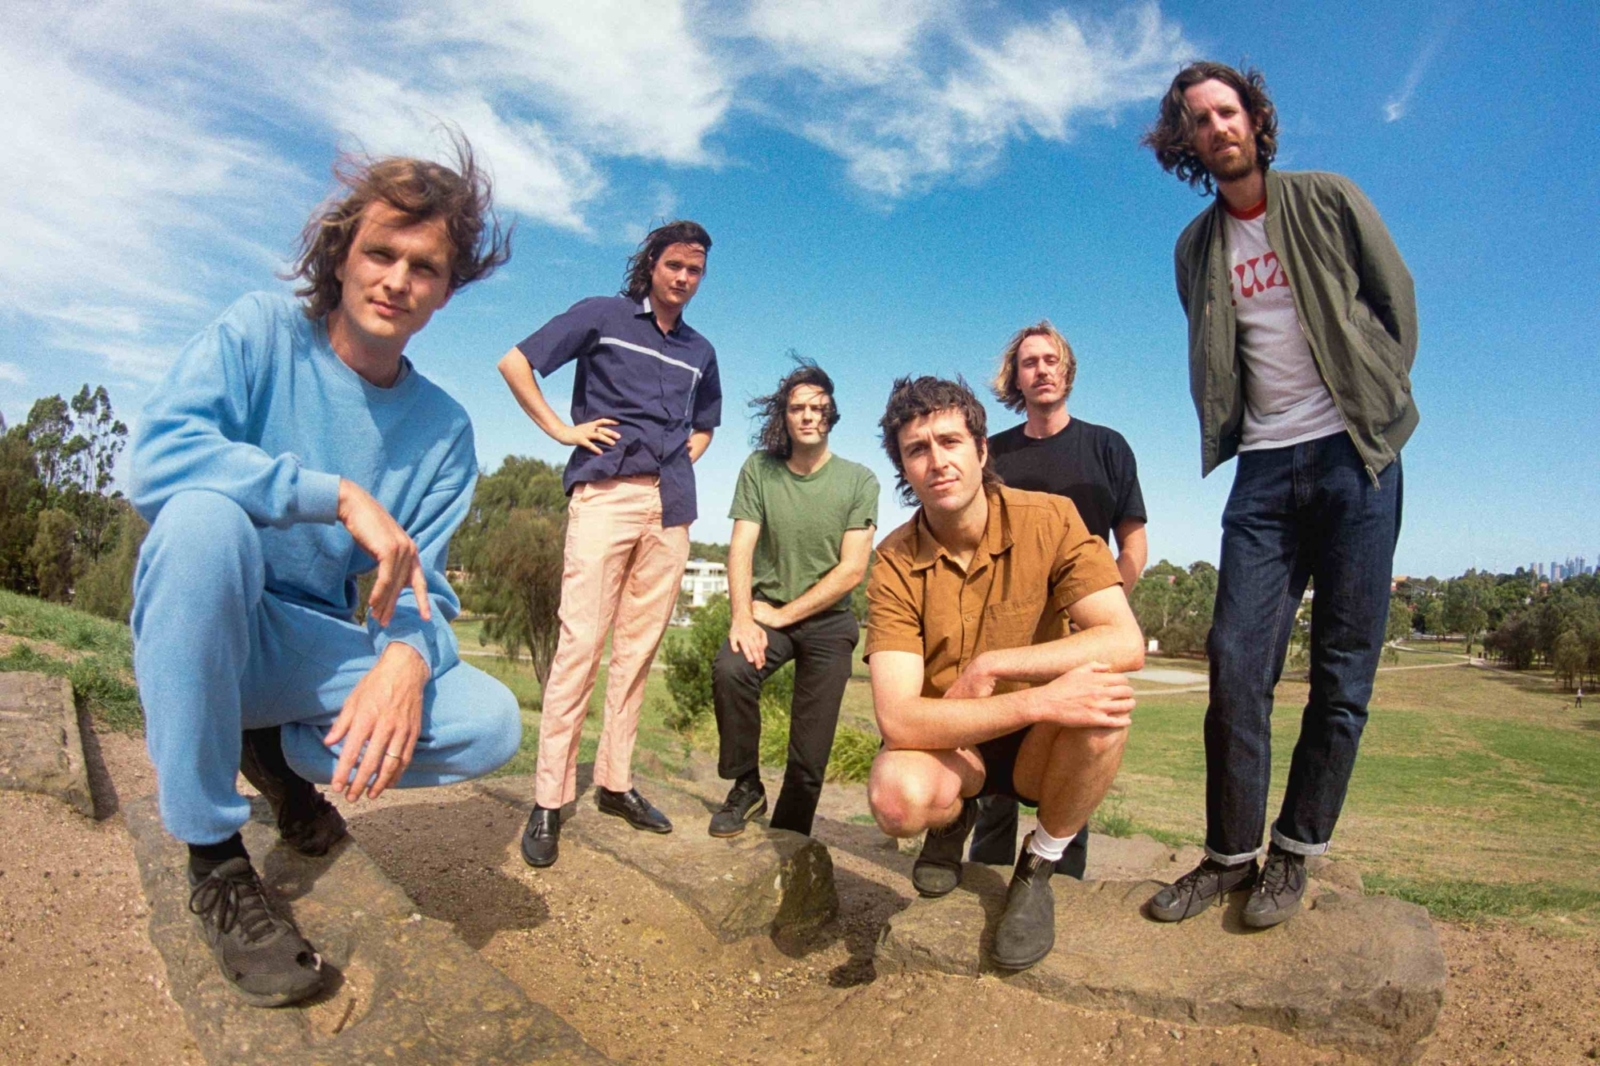 King Gizzard & The Lizard Wizard to release three new albums this year